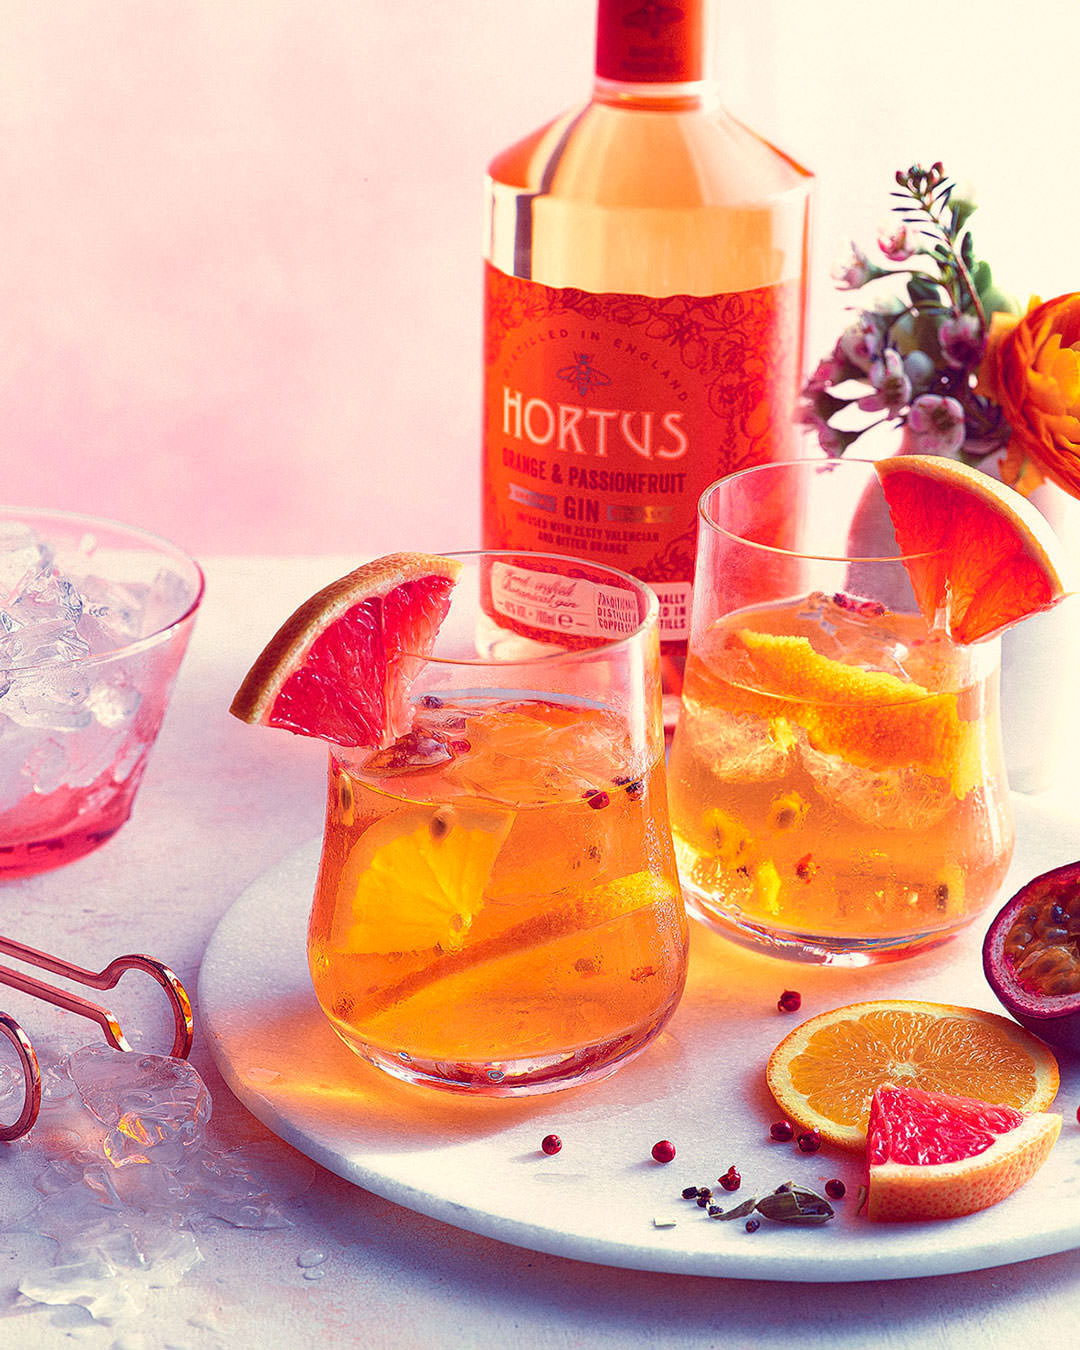 Hortus Orange and Passionfruit gin and tonic, in glass served with grapefruit slices - London Food & Drinks Photographer